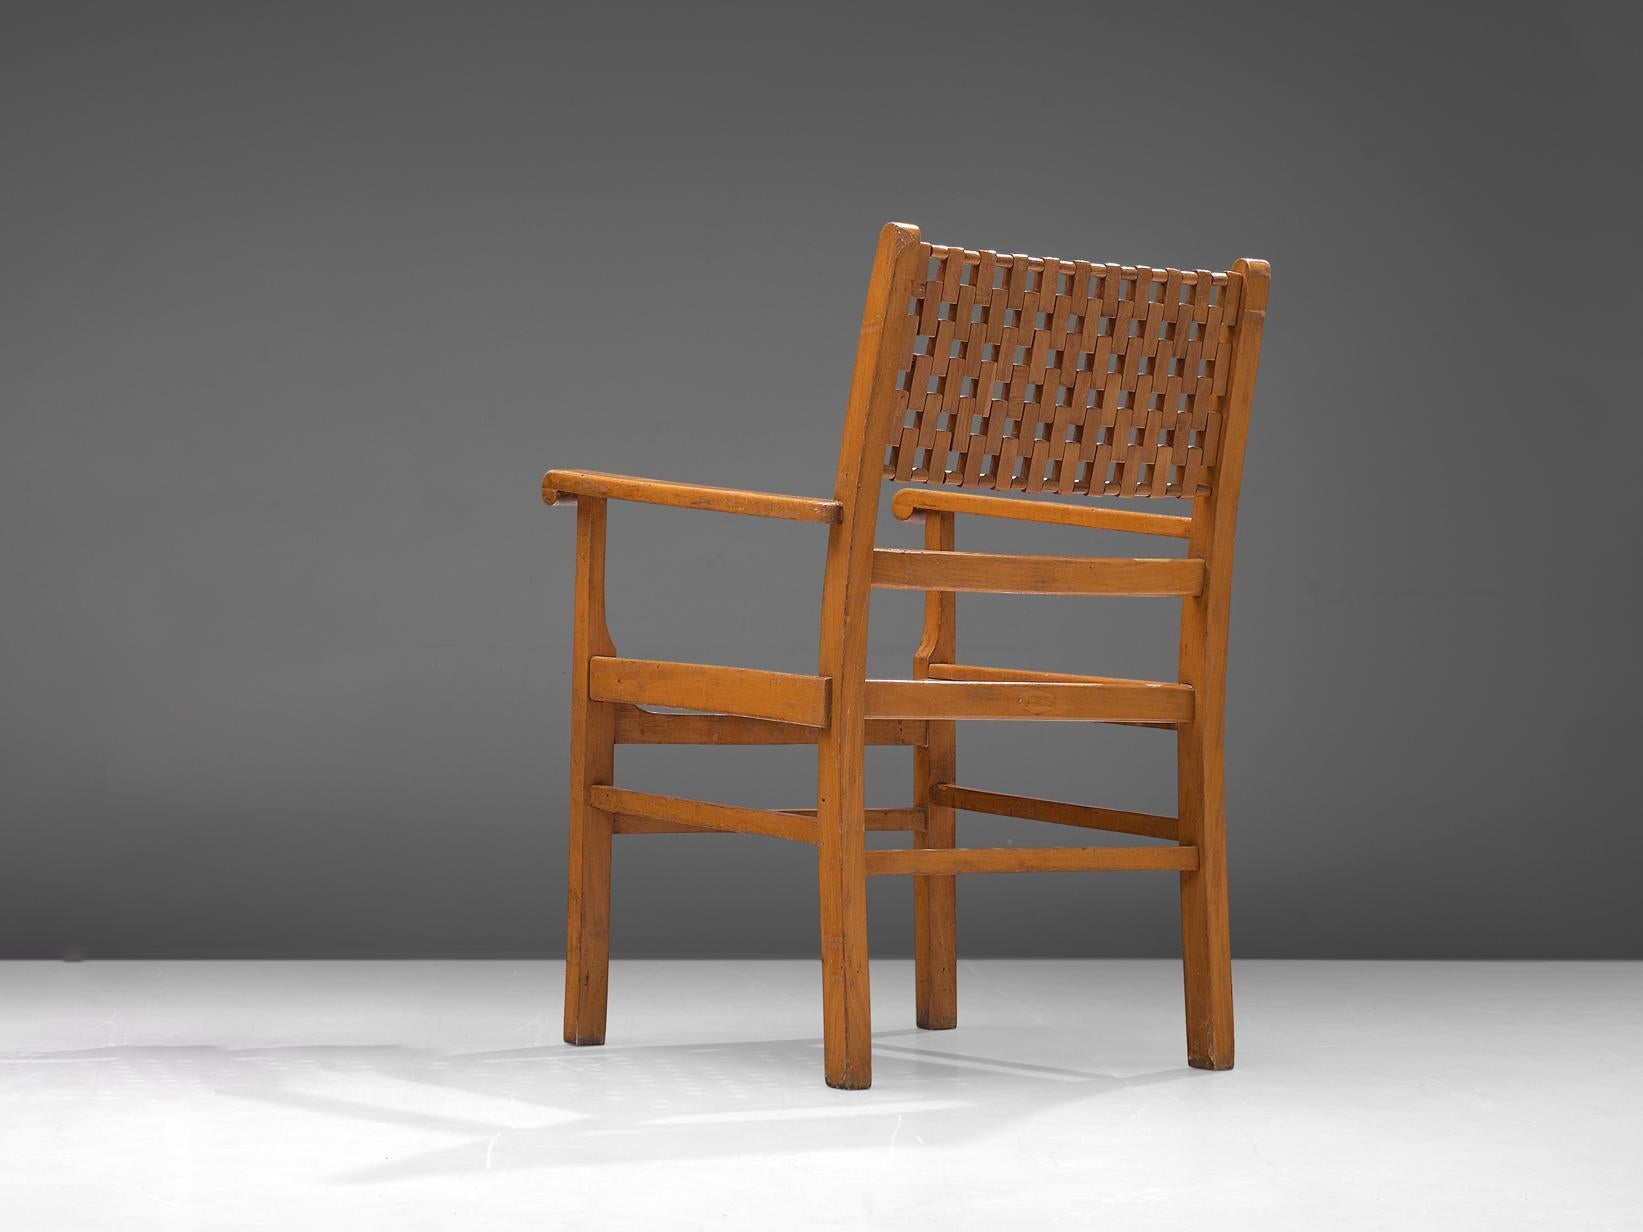 Armchair with Geometric Seat and Back in Blonde Wood